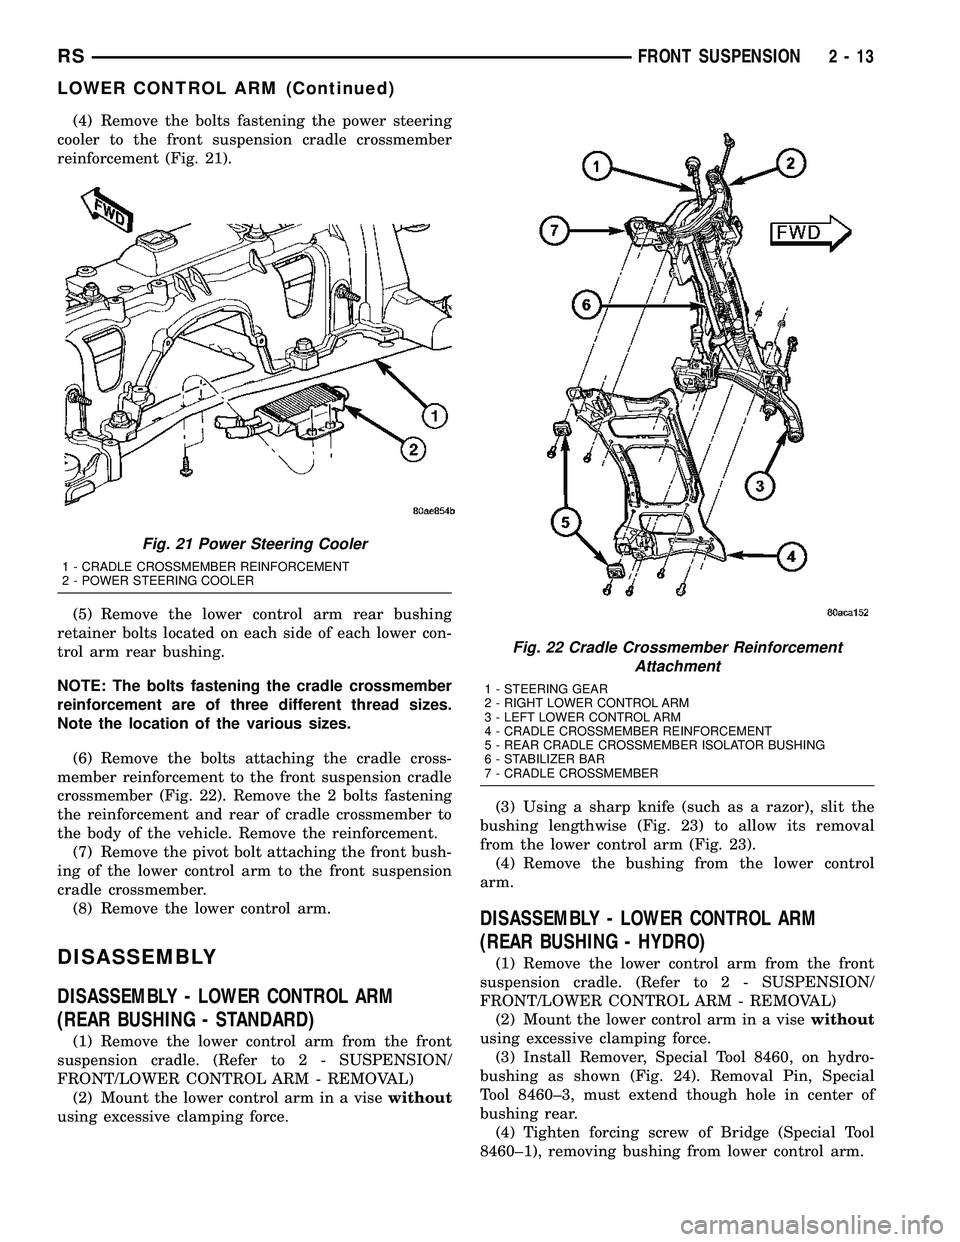 CHRYSLER CARAVAN 2005  Service Manual (4) Remove the bolts fastening the power steering
cooler to the front suspension cradle crossmember
reinforcement (Fig. 21).
(5) Remove the lower control arm rear bushing
retainer bolts located on eac